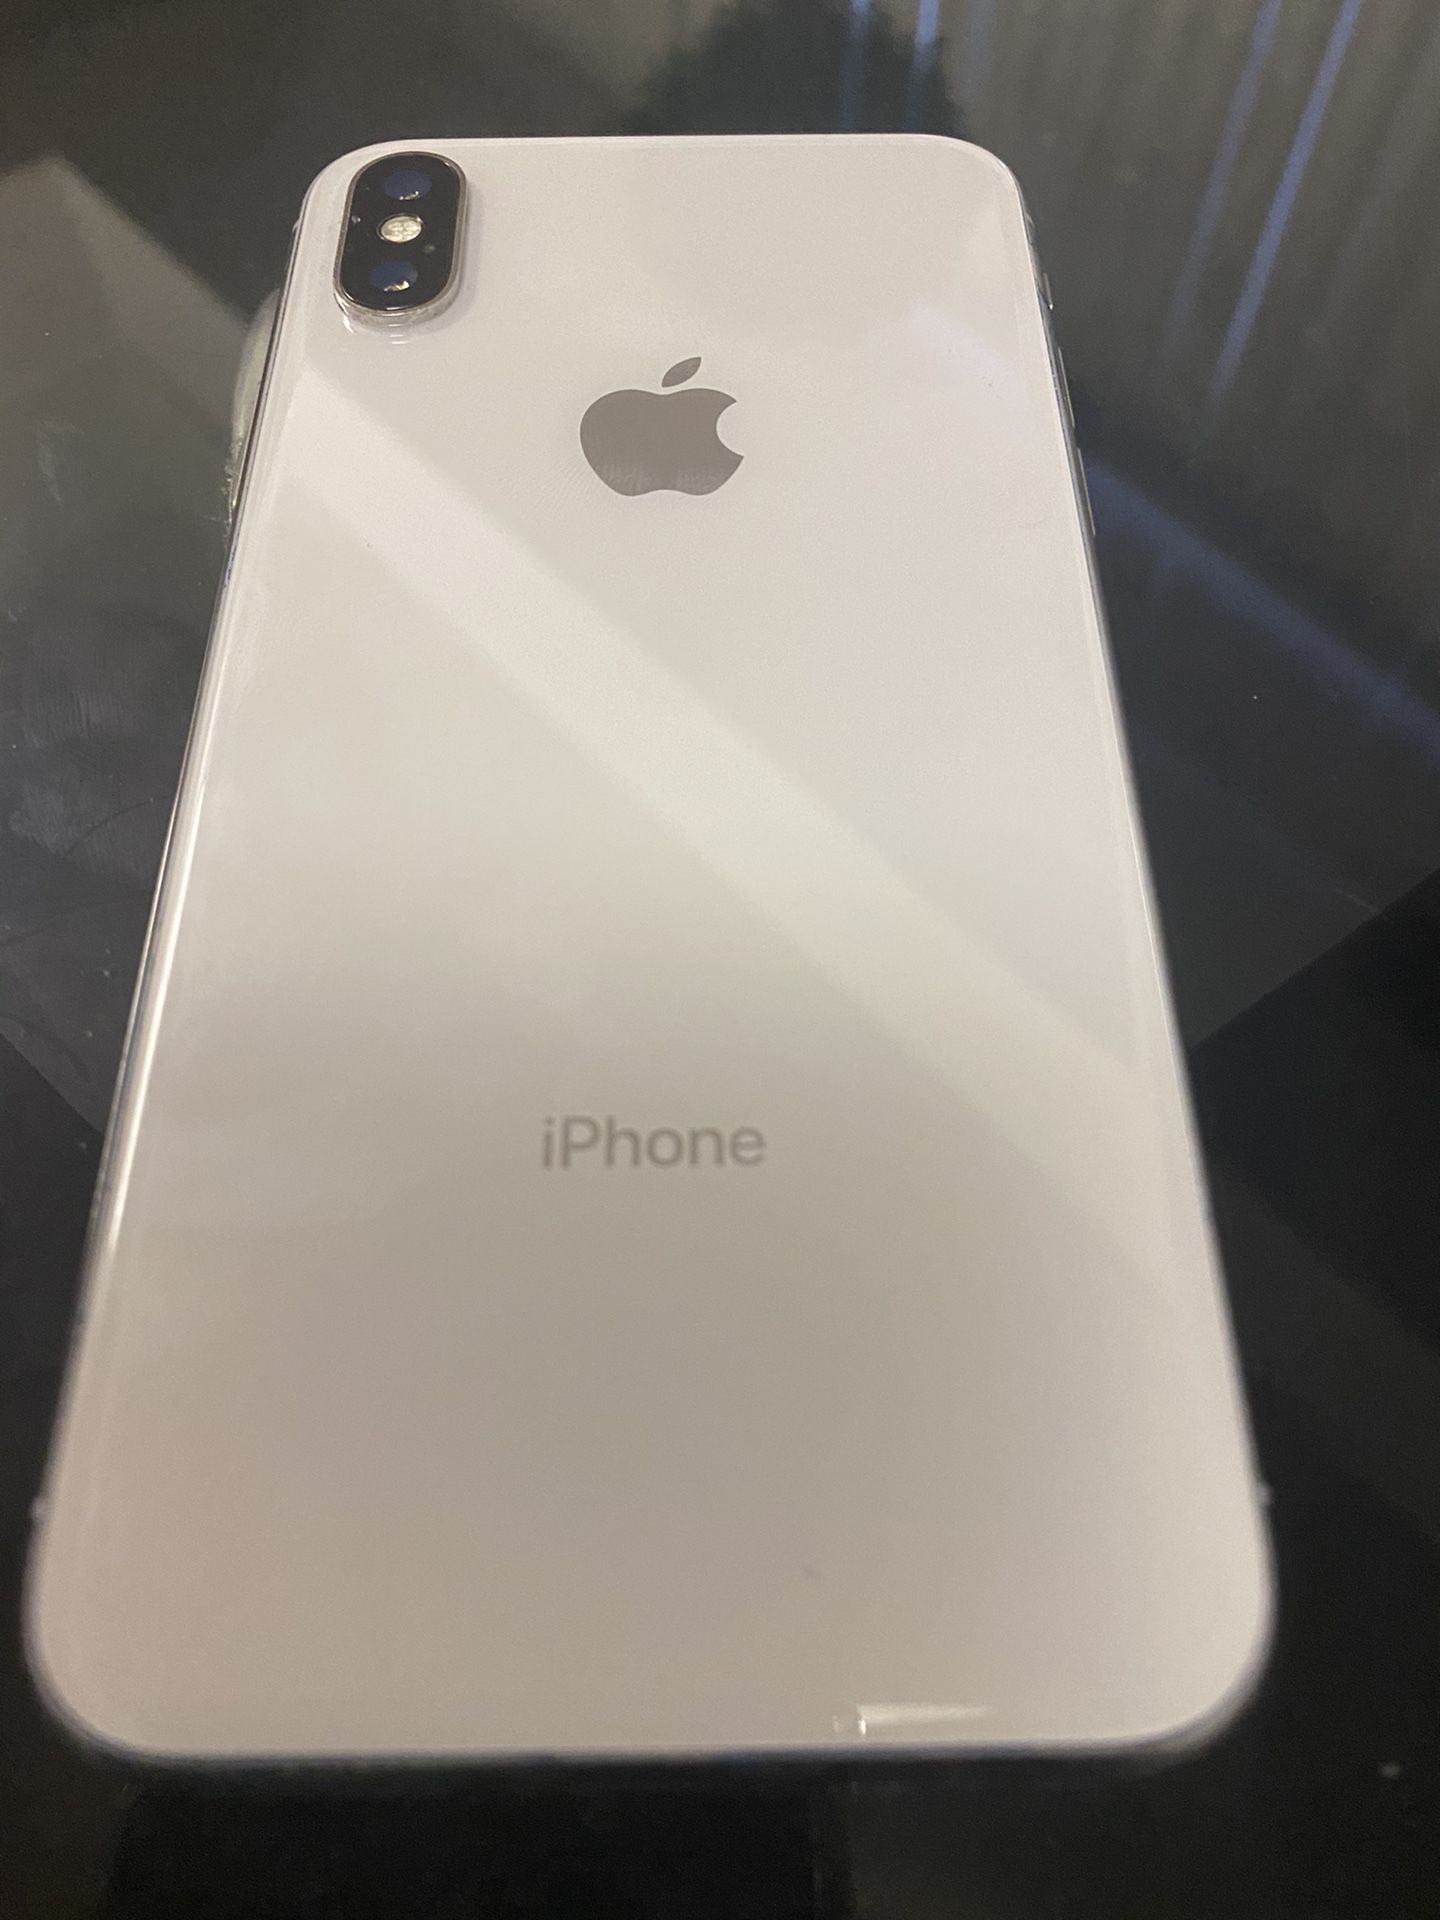 iPhone X - 256 GB- Unlocked - For Sale!